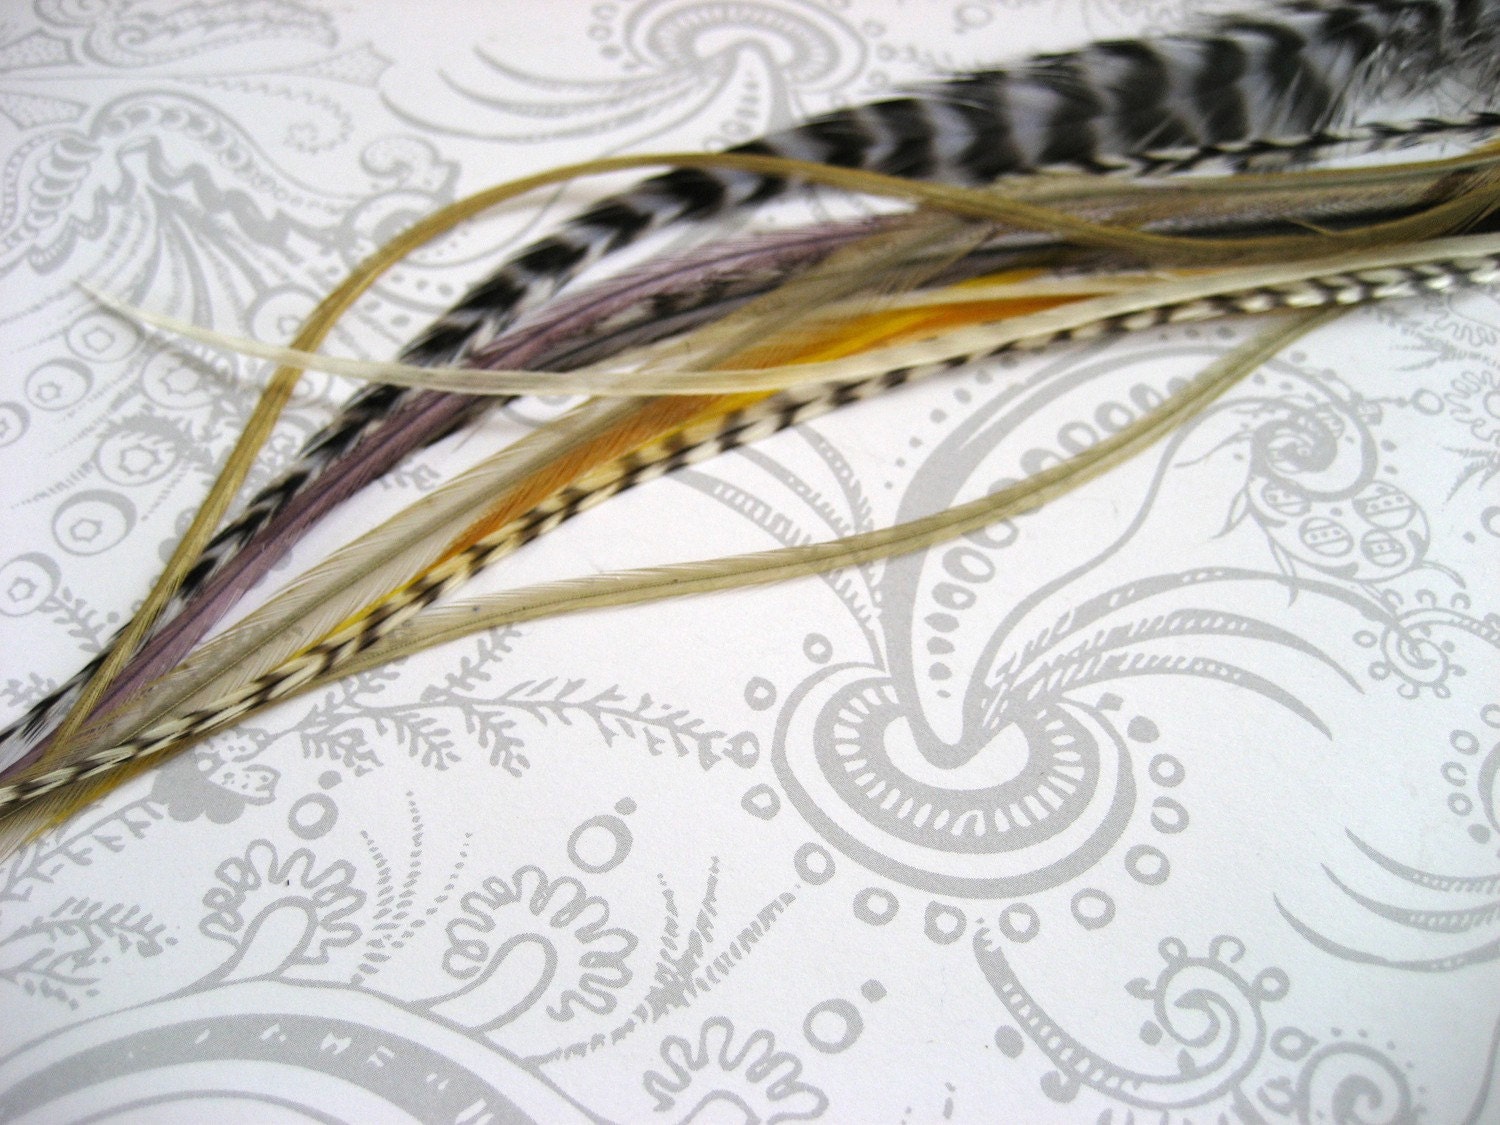 feather hair extensions michigan. Tundra Collection - 12 Feather Hair Extensions with 4 Micro Beads. From BelleEpoch